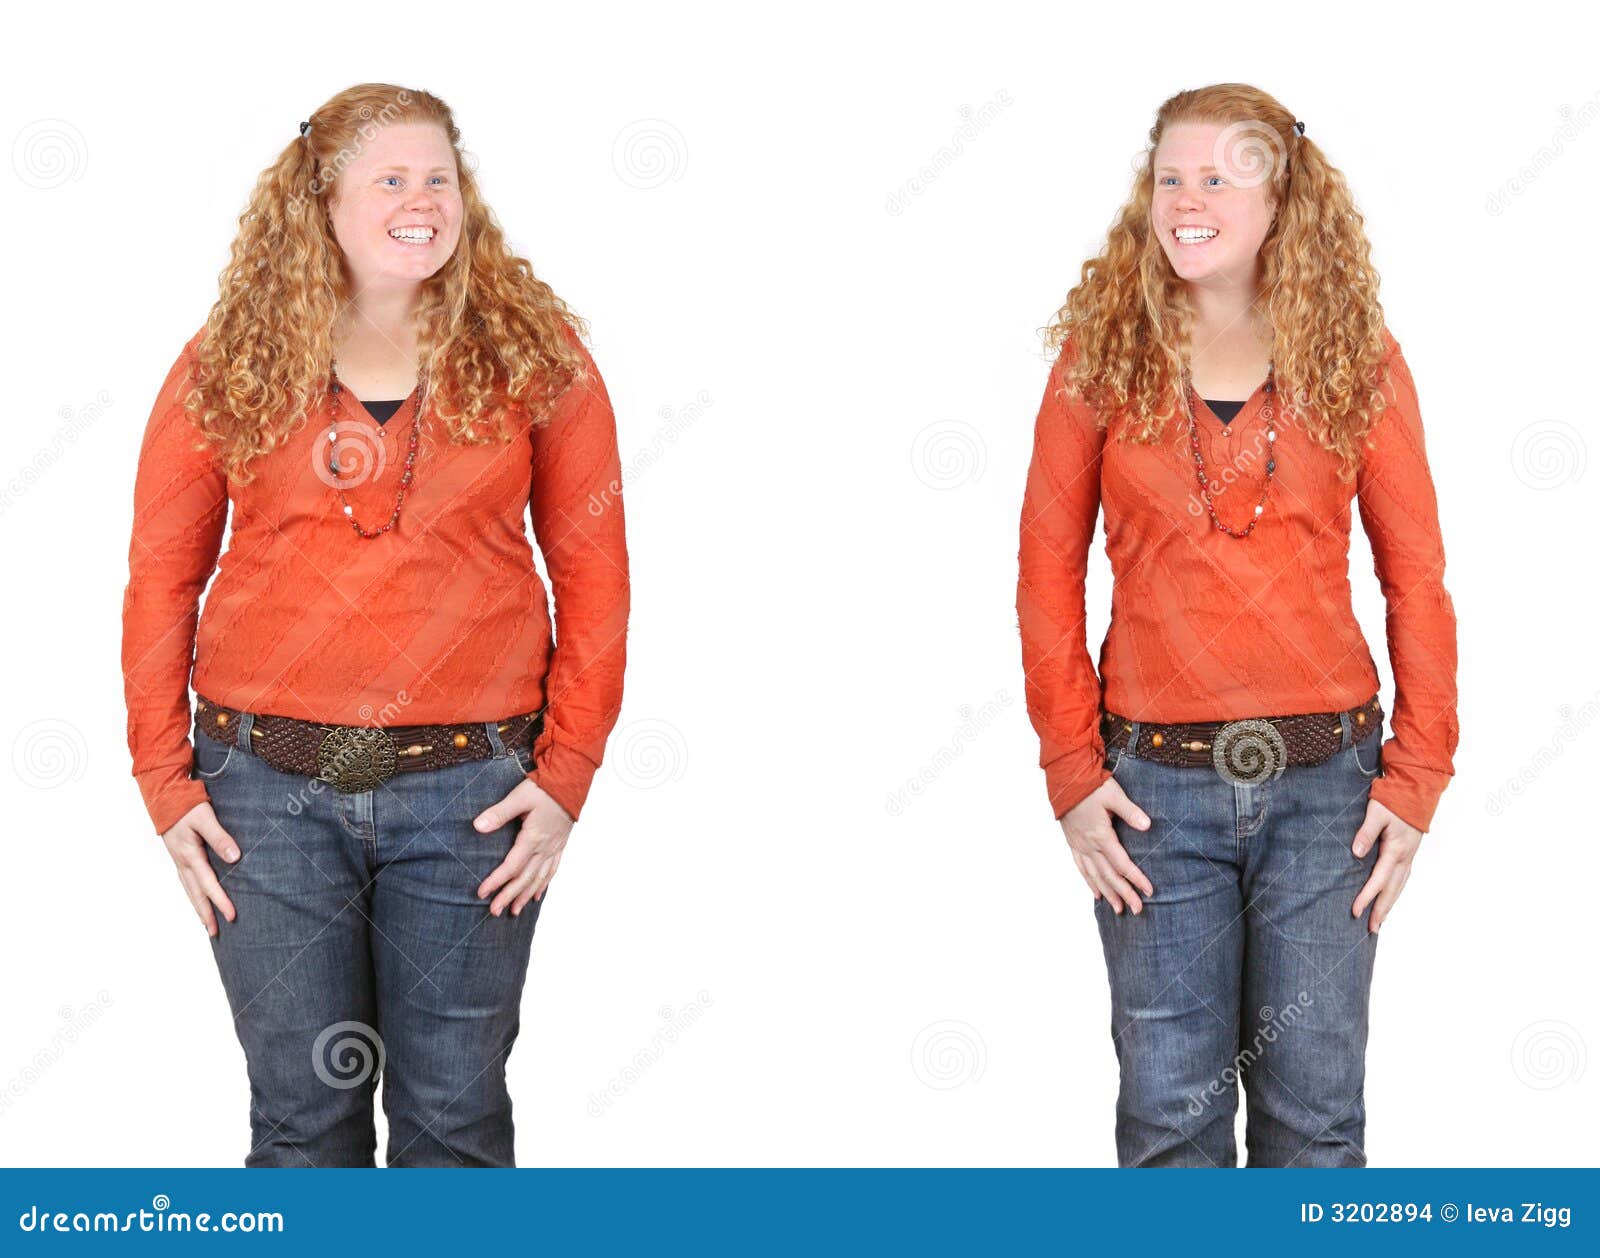 Before and after Weight Loss Stock Photo - Image of woman, weight